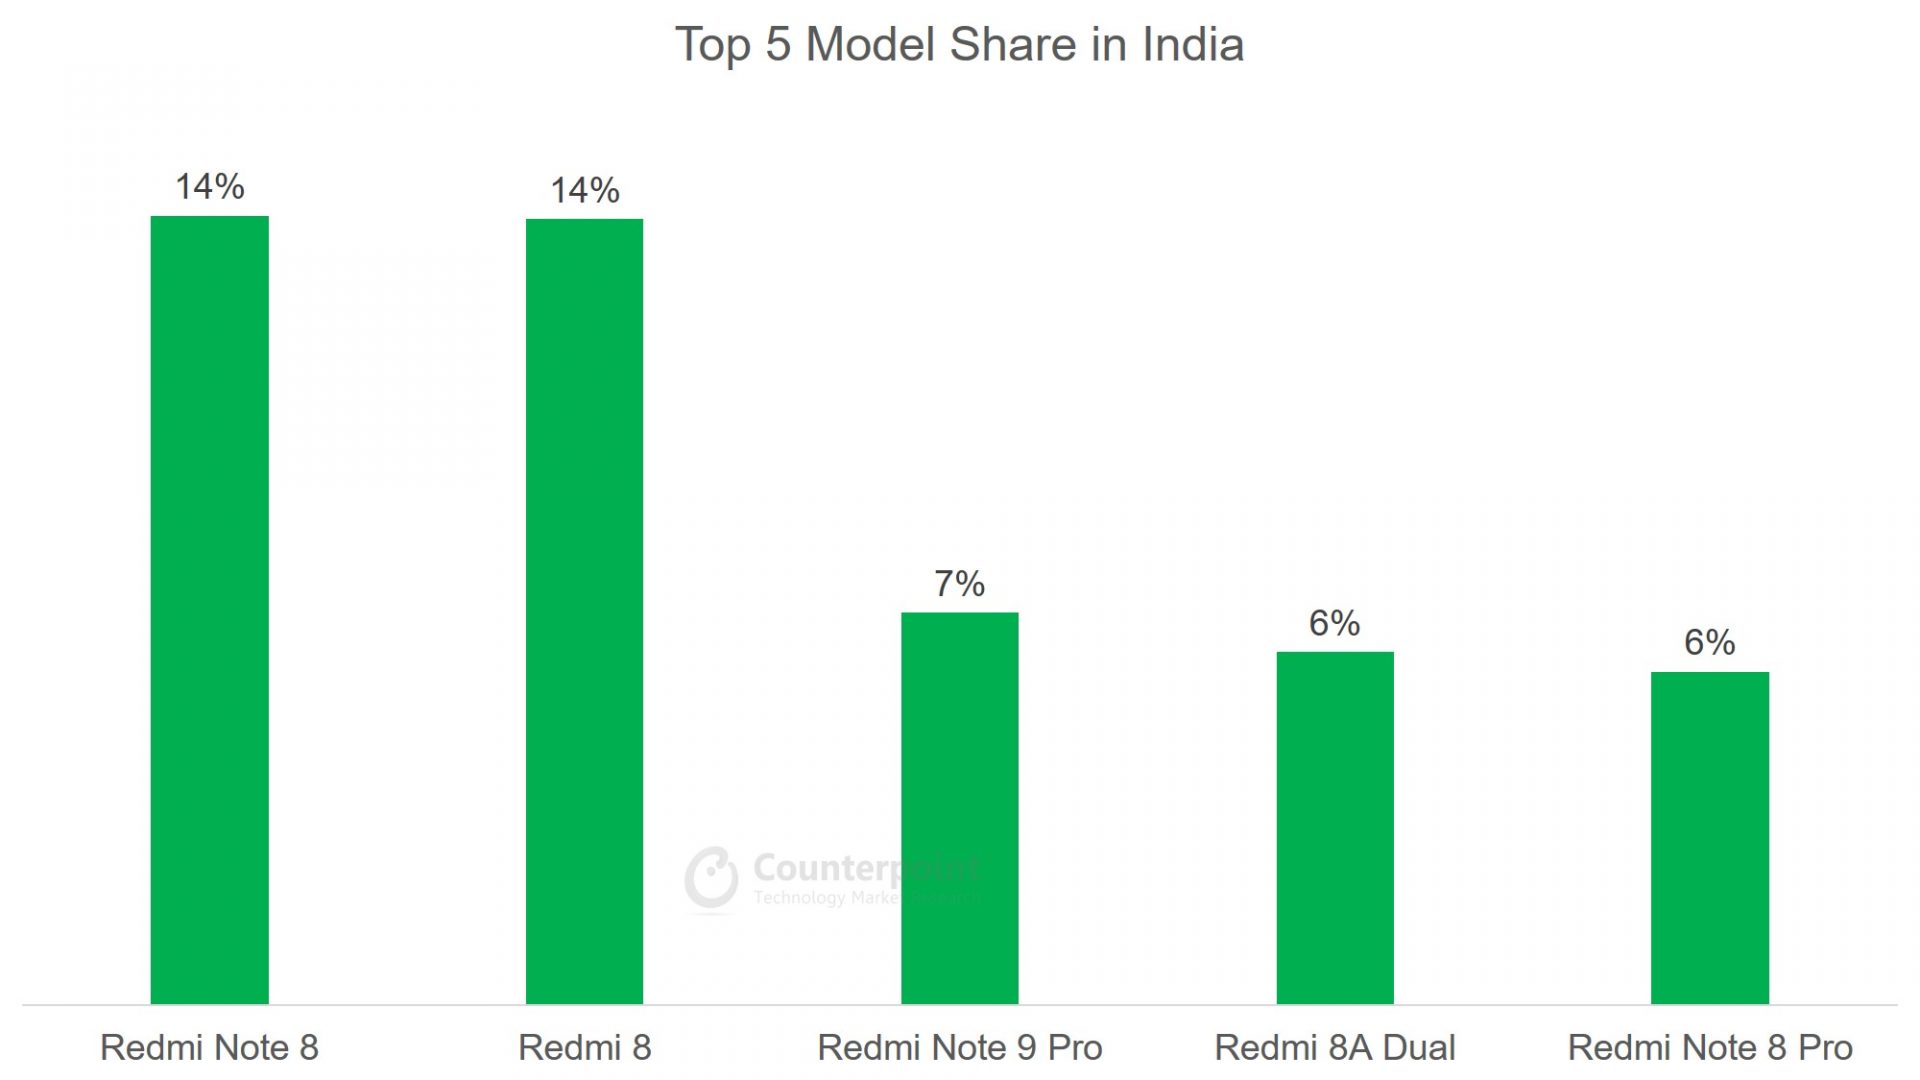 Counterpoint: (Apr 2020) Top 5 Smartphone Model Share in India